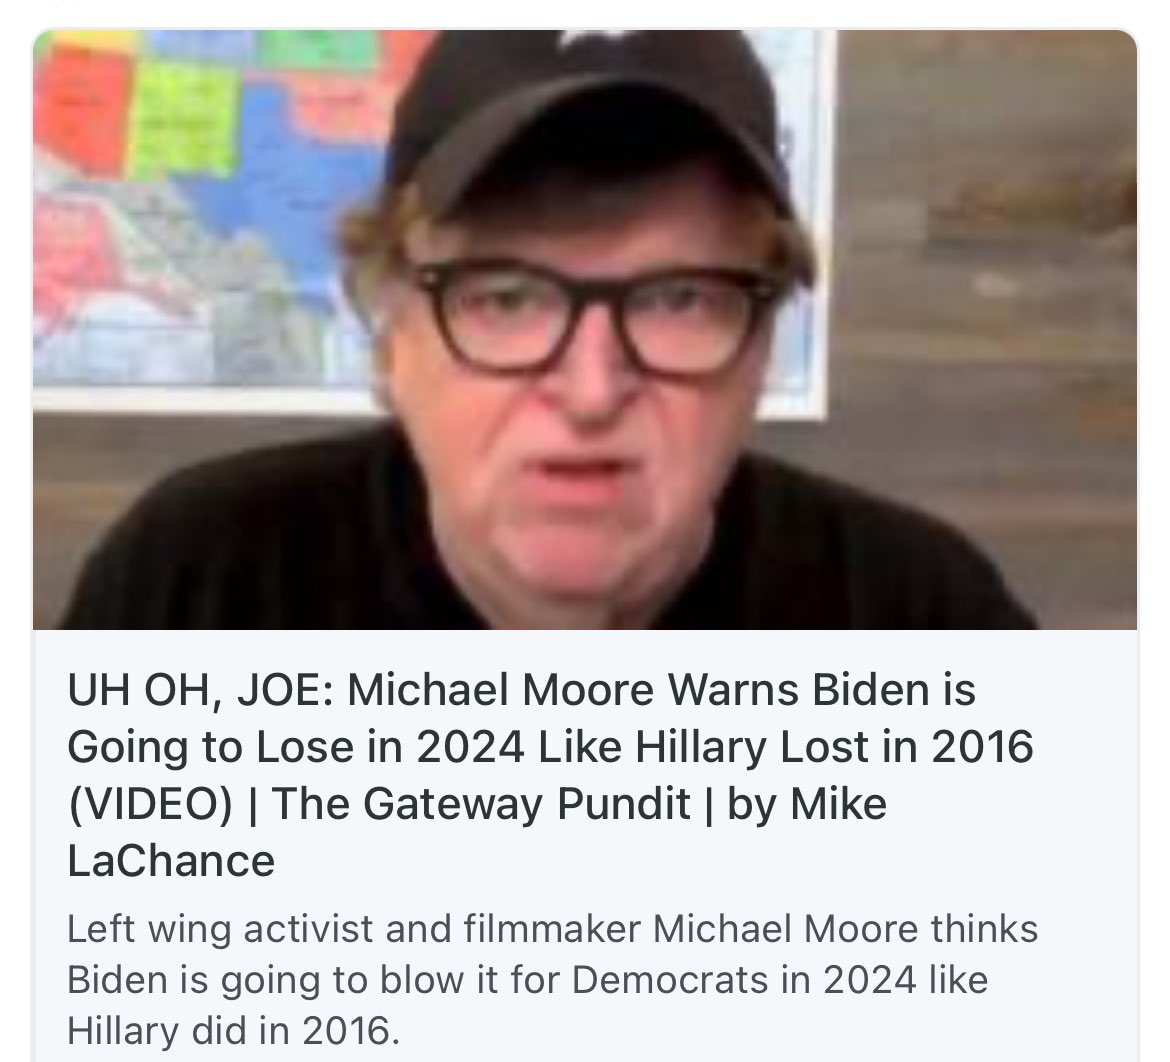 Pretty bad when looney left Michael Moore predicts Biden will lose like Hillary 😂 we know Mike 😁